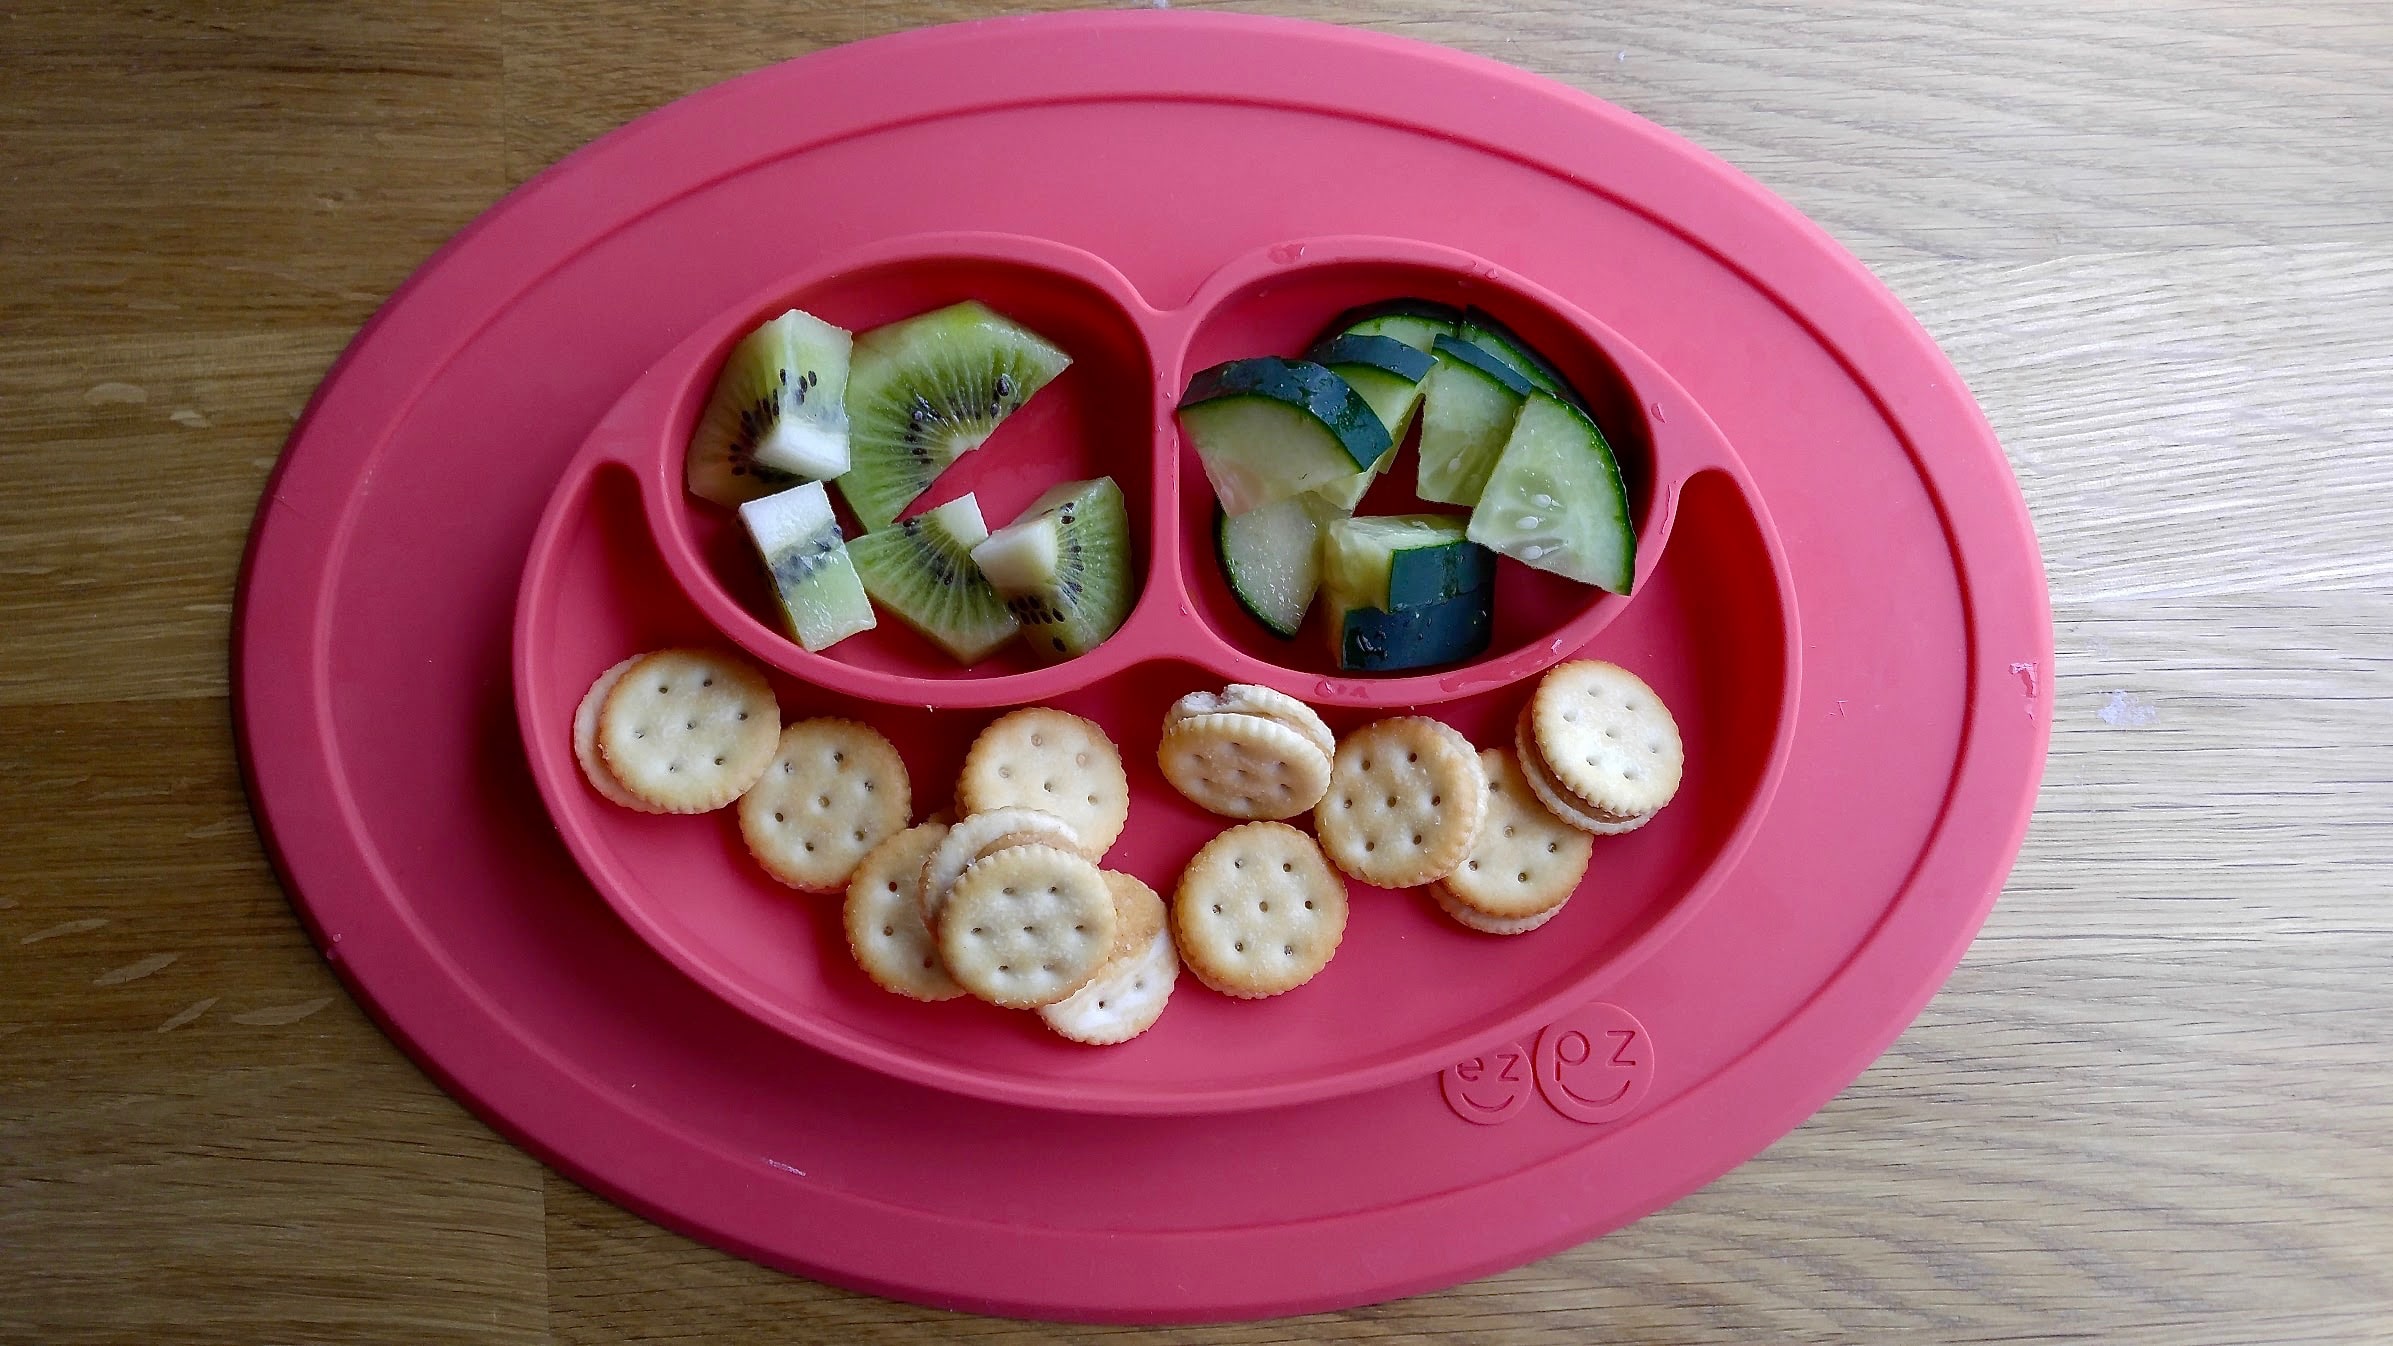 Food cubbies separate food for picky eaters